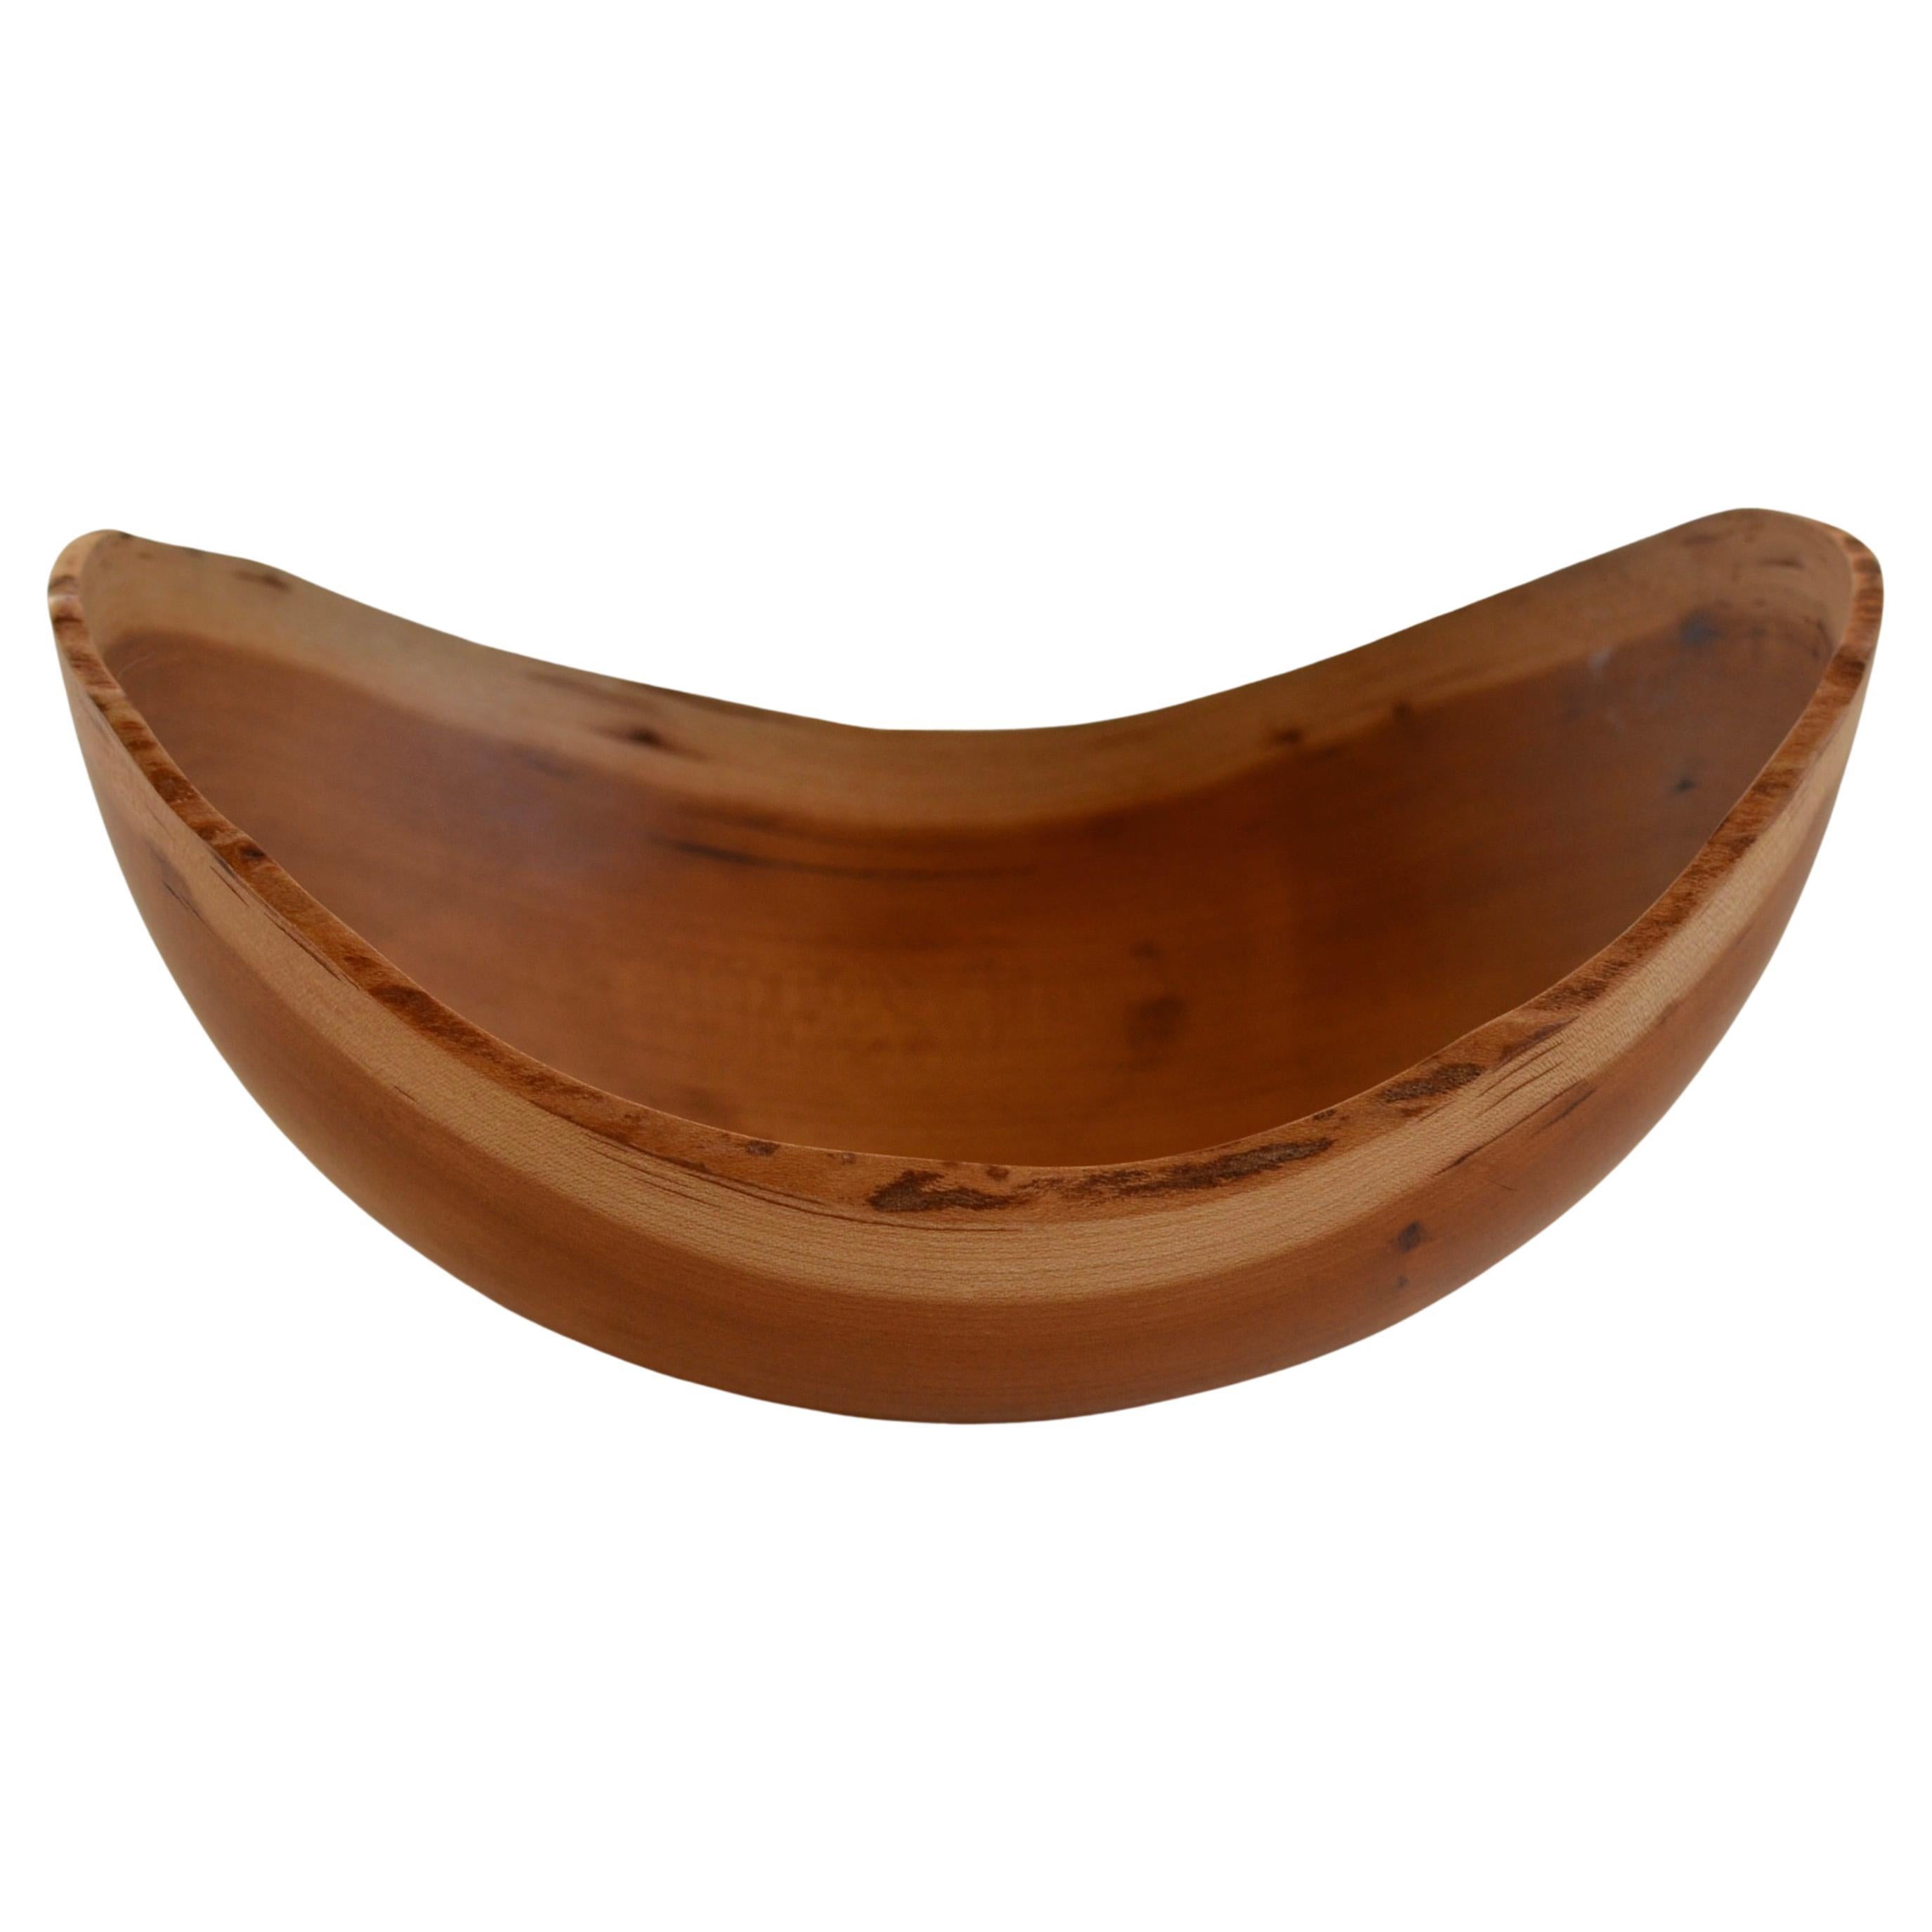 Hand-Carved Cherry Wood Bowl with Natural Edge